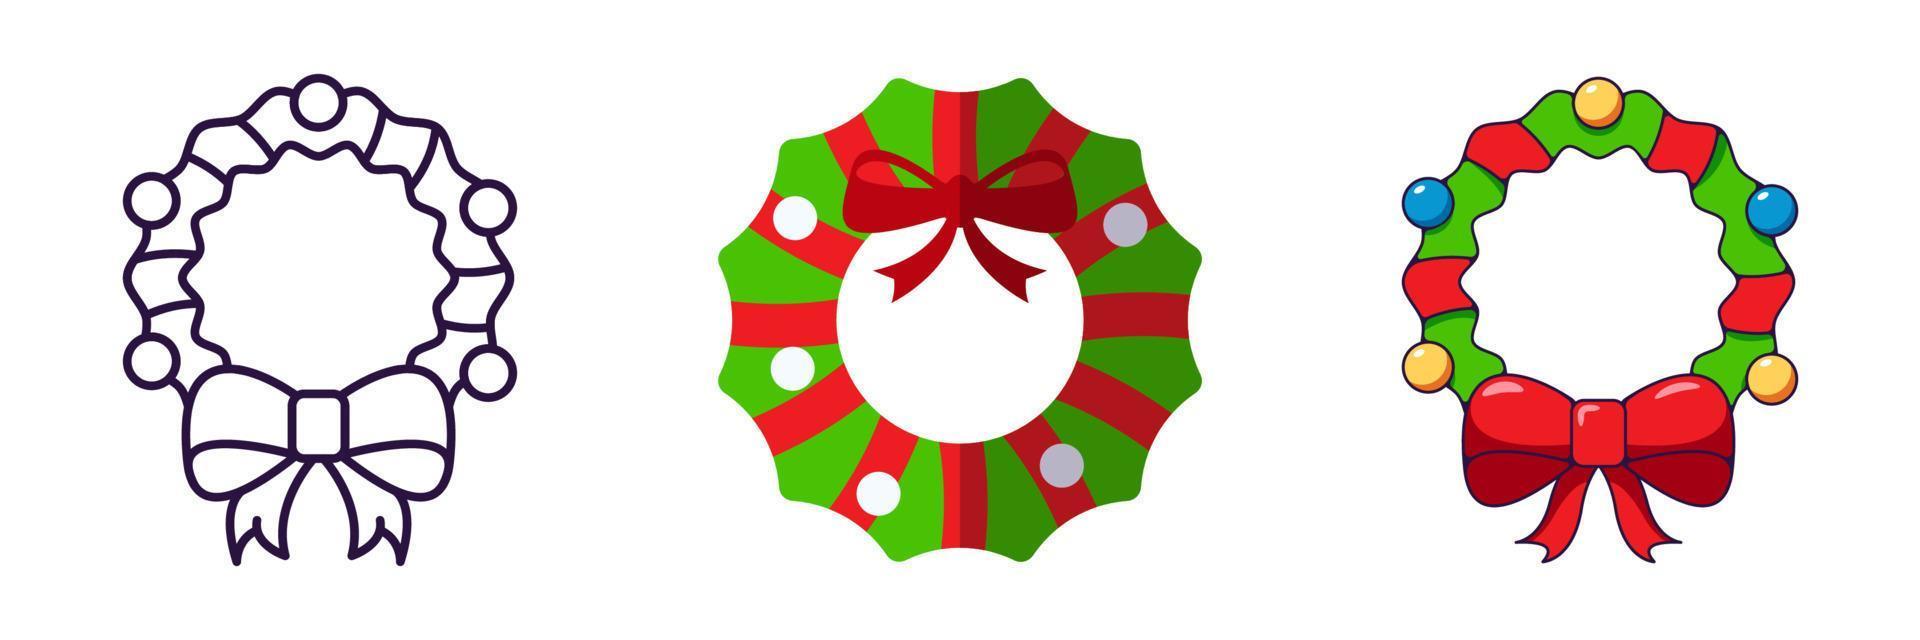 Merry Christmas and Happy New Year concept. Collection of icon of Christmas wreath in line, flat and cartoon styles for web sites, adverts, articles, shops, stores vector